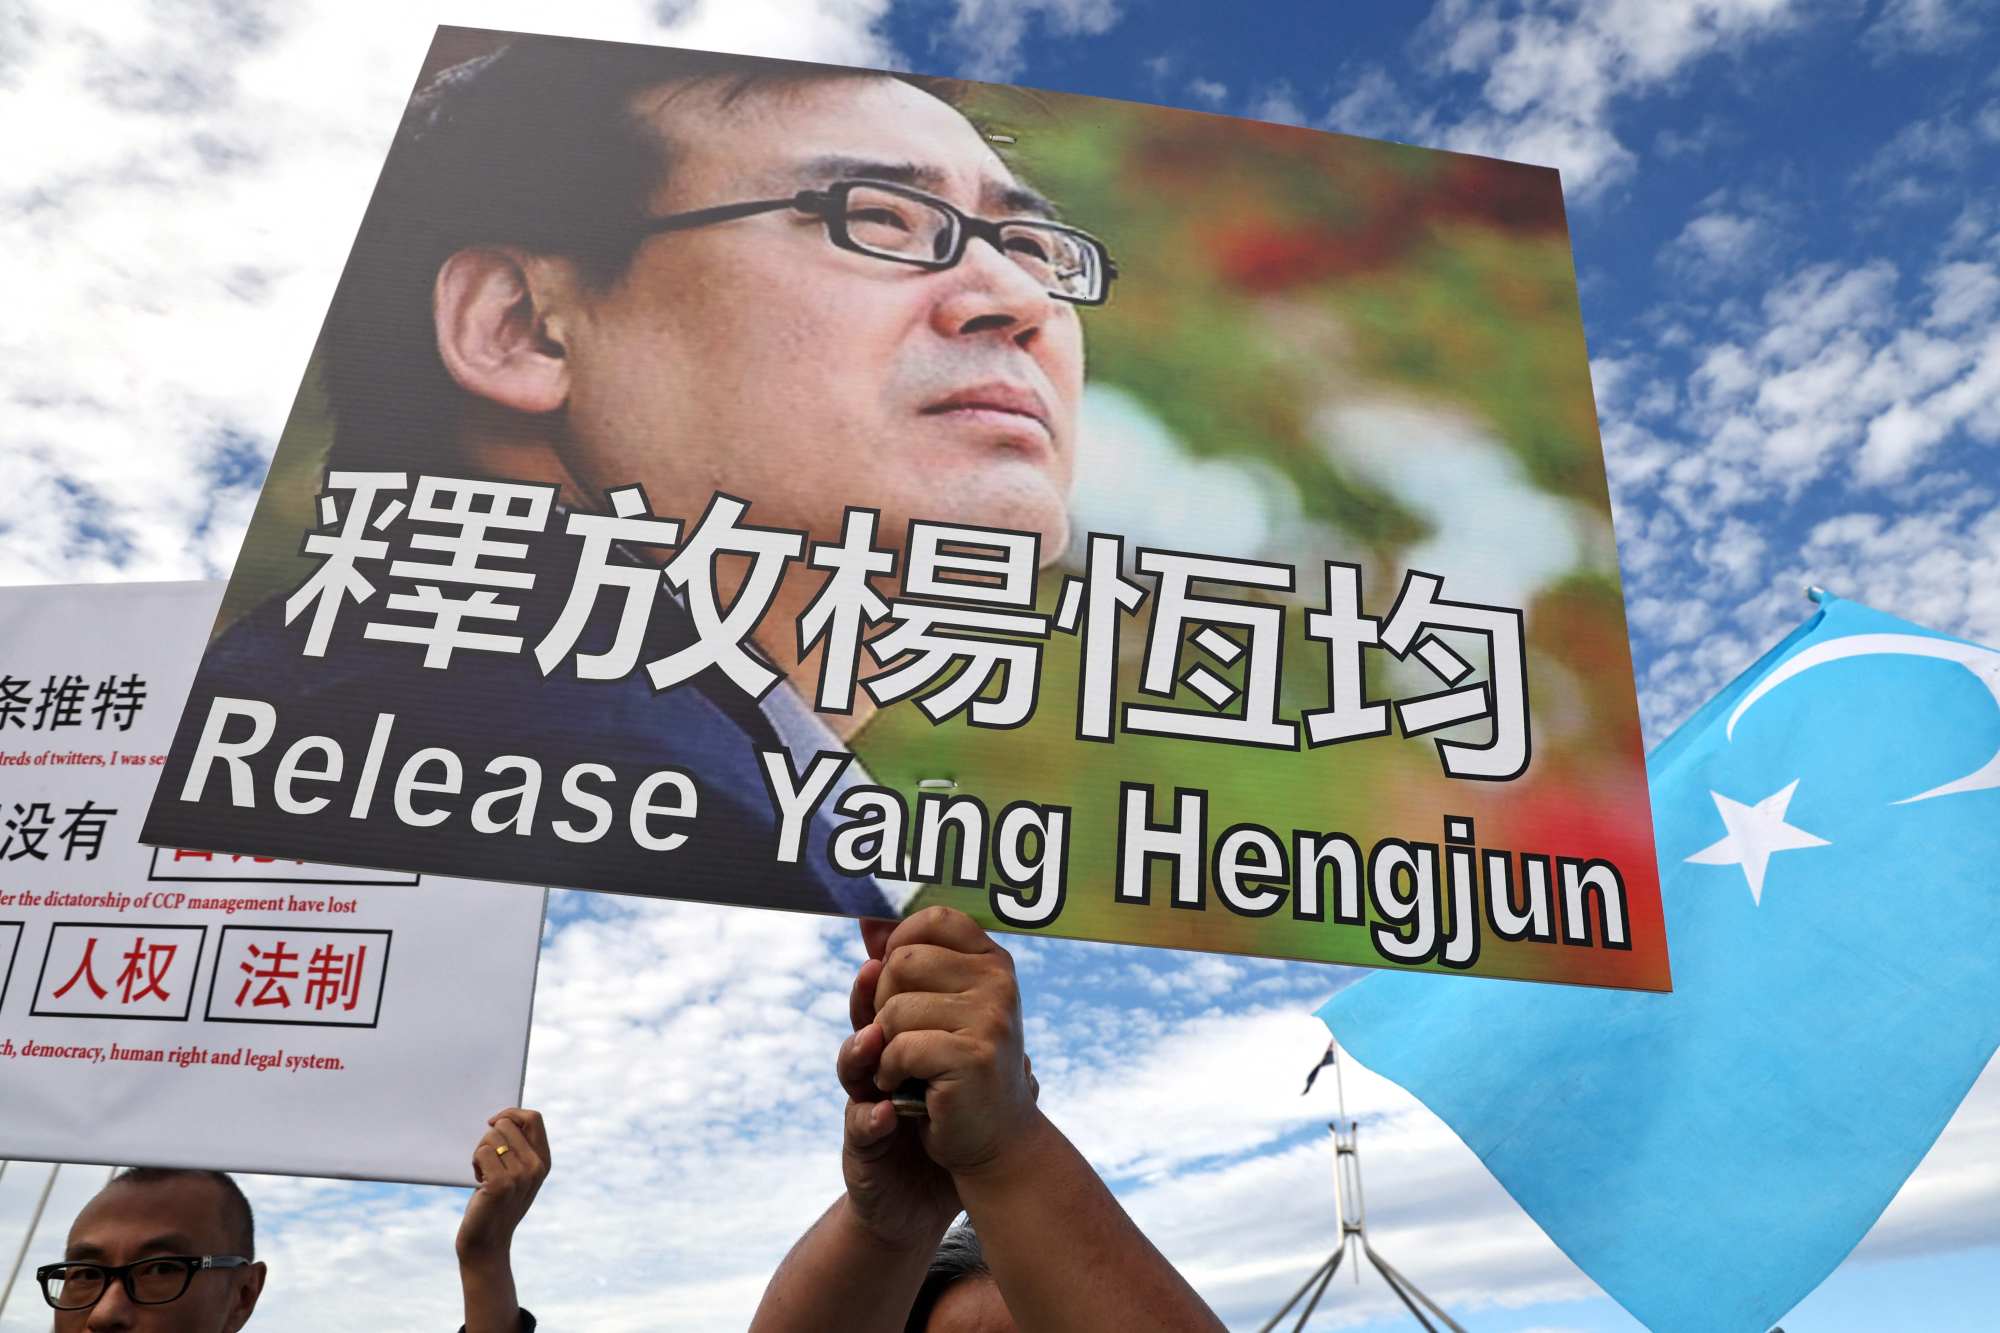 Protesters hold placards demanding the release of Australian academic Yang Hengjun during a rally outside Parliament House in Canberra, Australia, on Wednesday. Photo: AFP